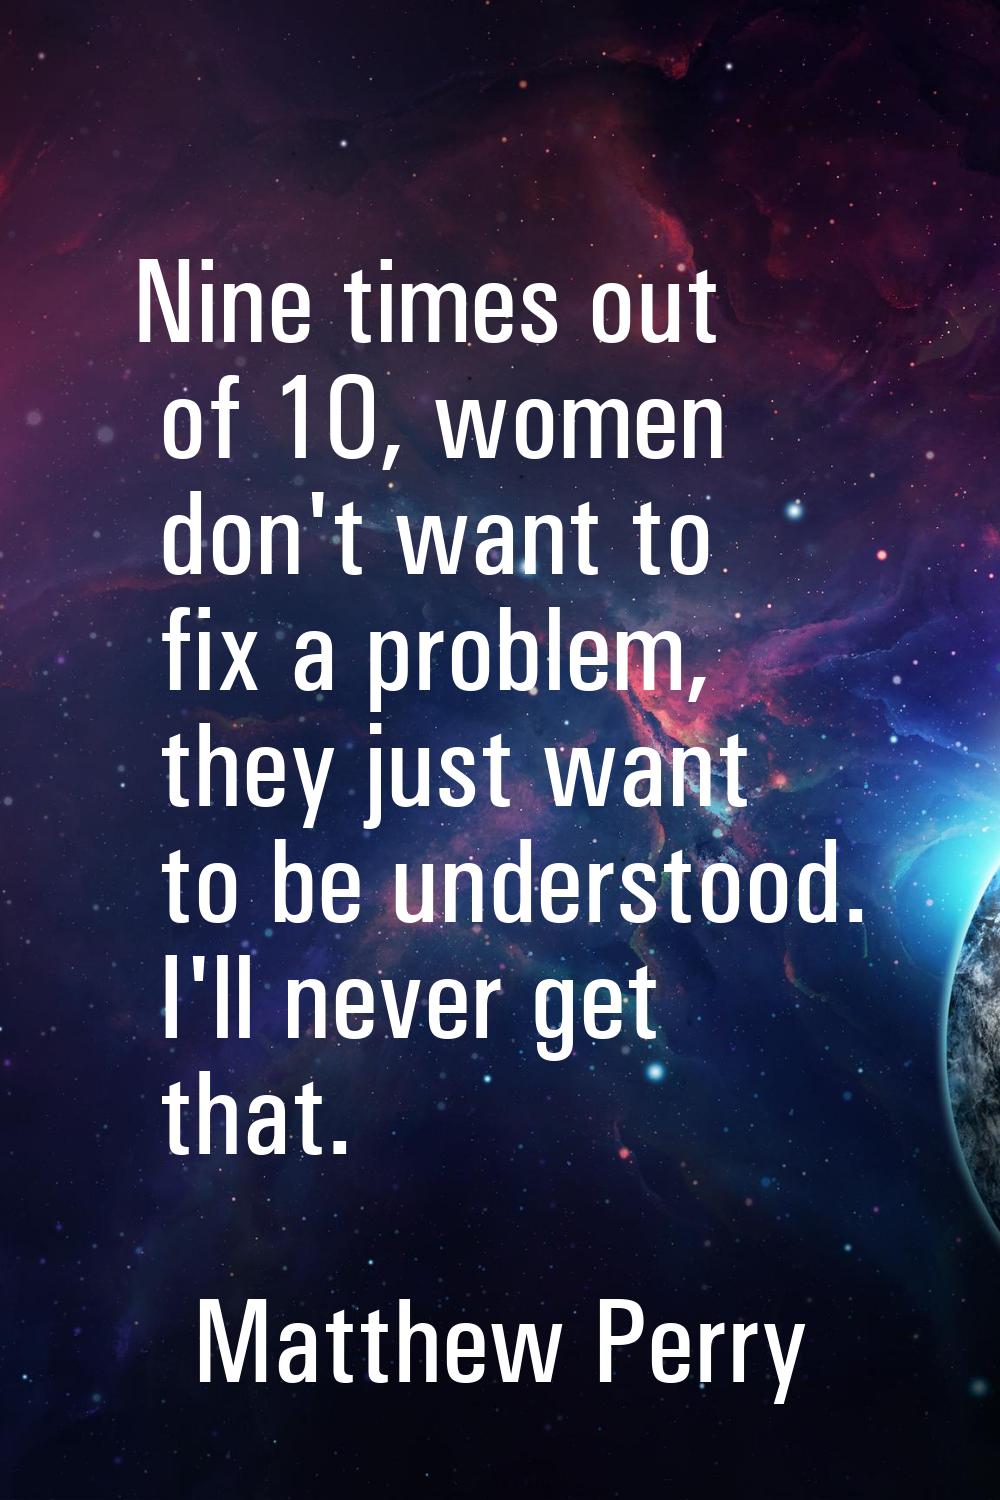 Nine times out of 10, women don't want to fix a problem, they just want to be understood. I'll neve